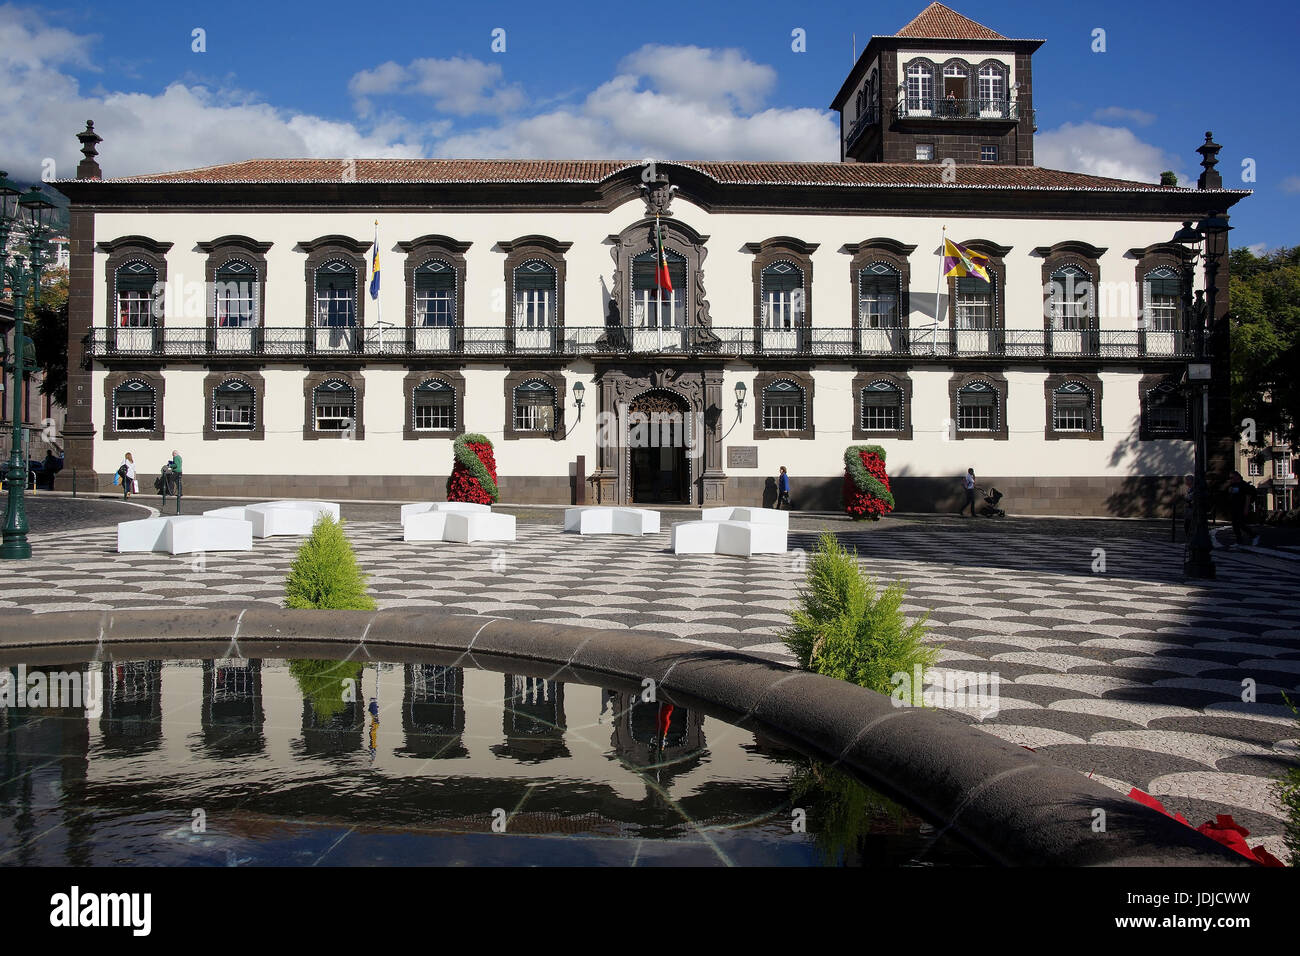 Europe, Portugal, Madeira, the Azores, island group, islands, Funchal, city hall,, Europa, Azoren, Inselgruppe, Inseln, Rathaus, Stock Photo